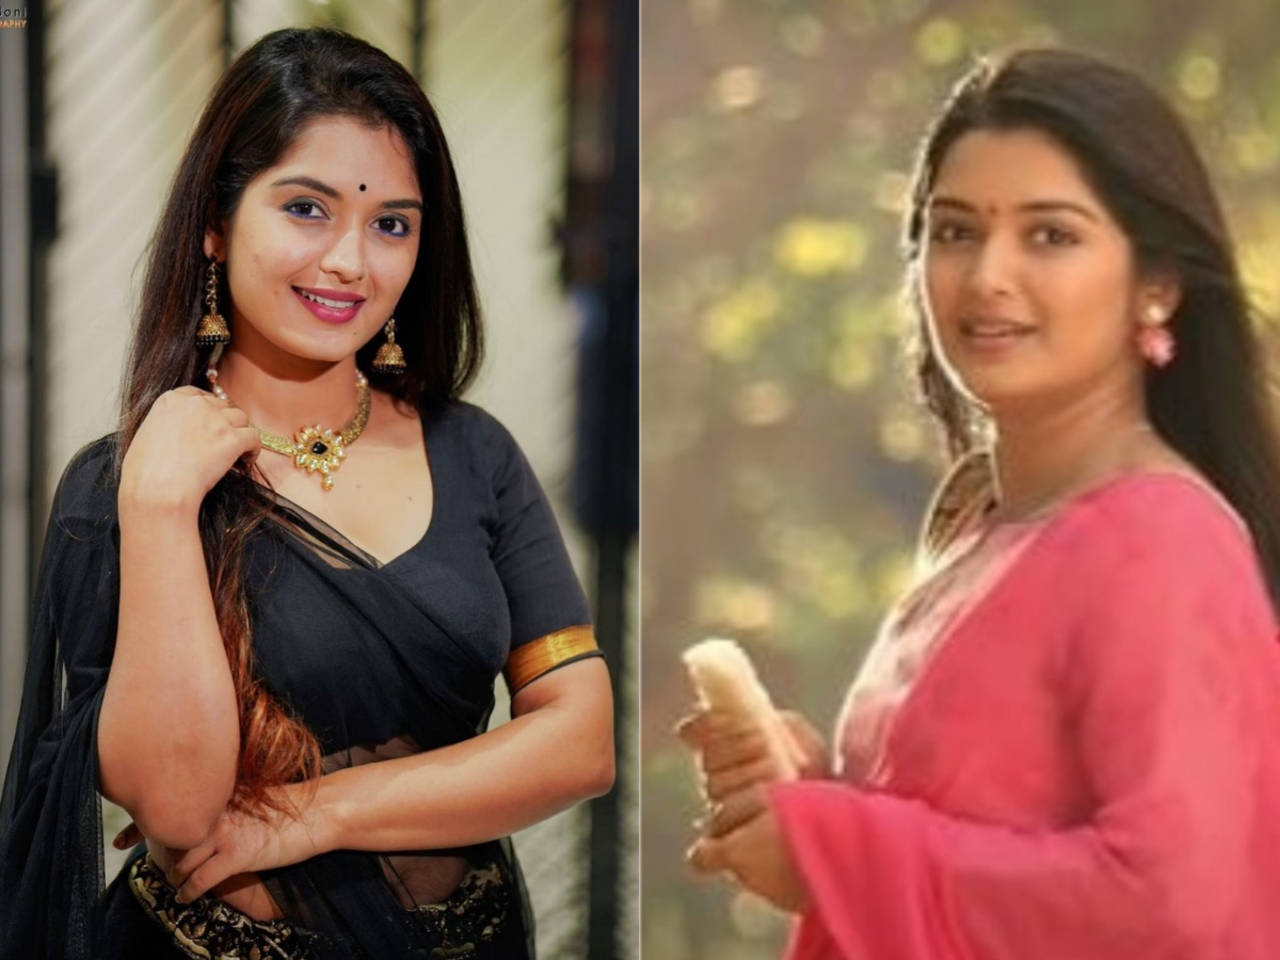 Janaki Kalaganaledu makes into top 5; here's what actress Priyanka Jain has  to say about the show's success - Times of India